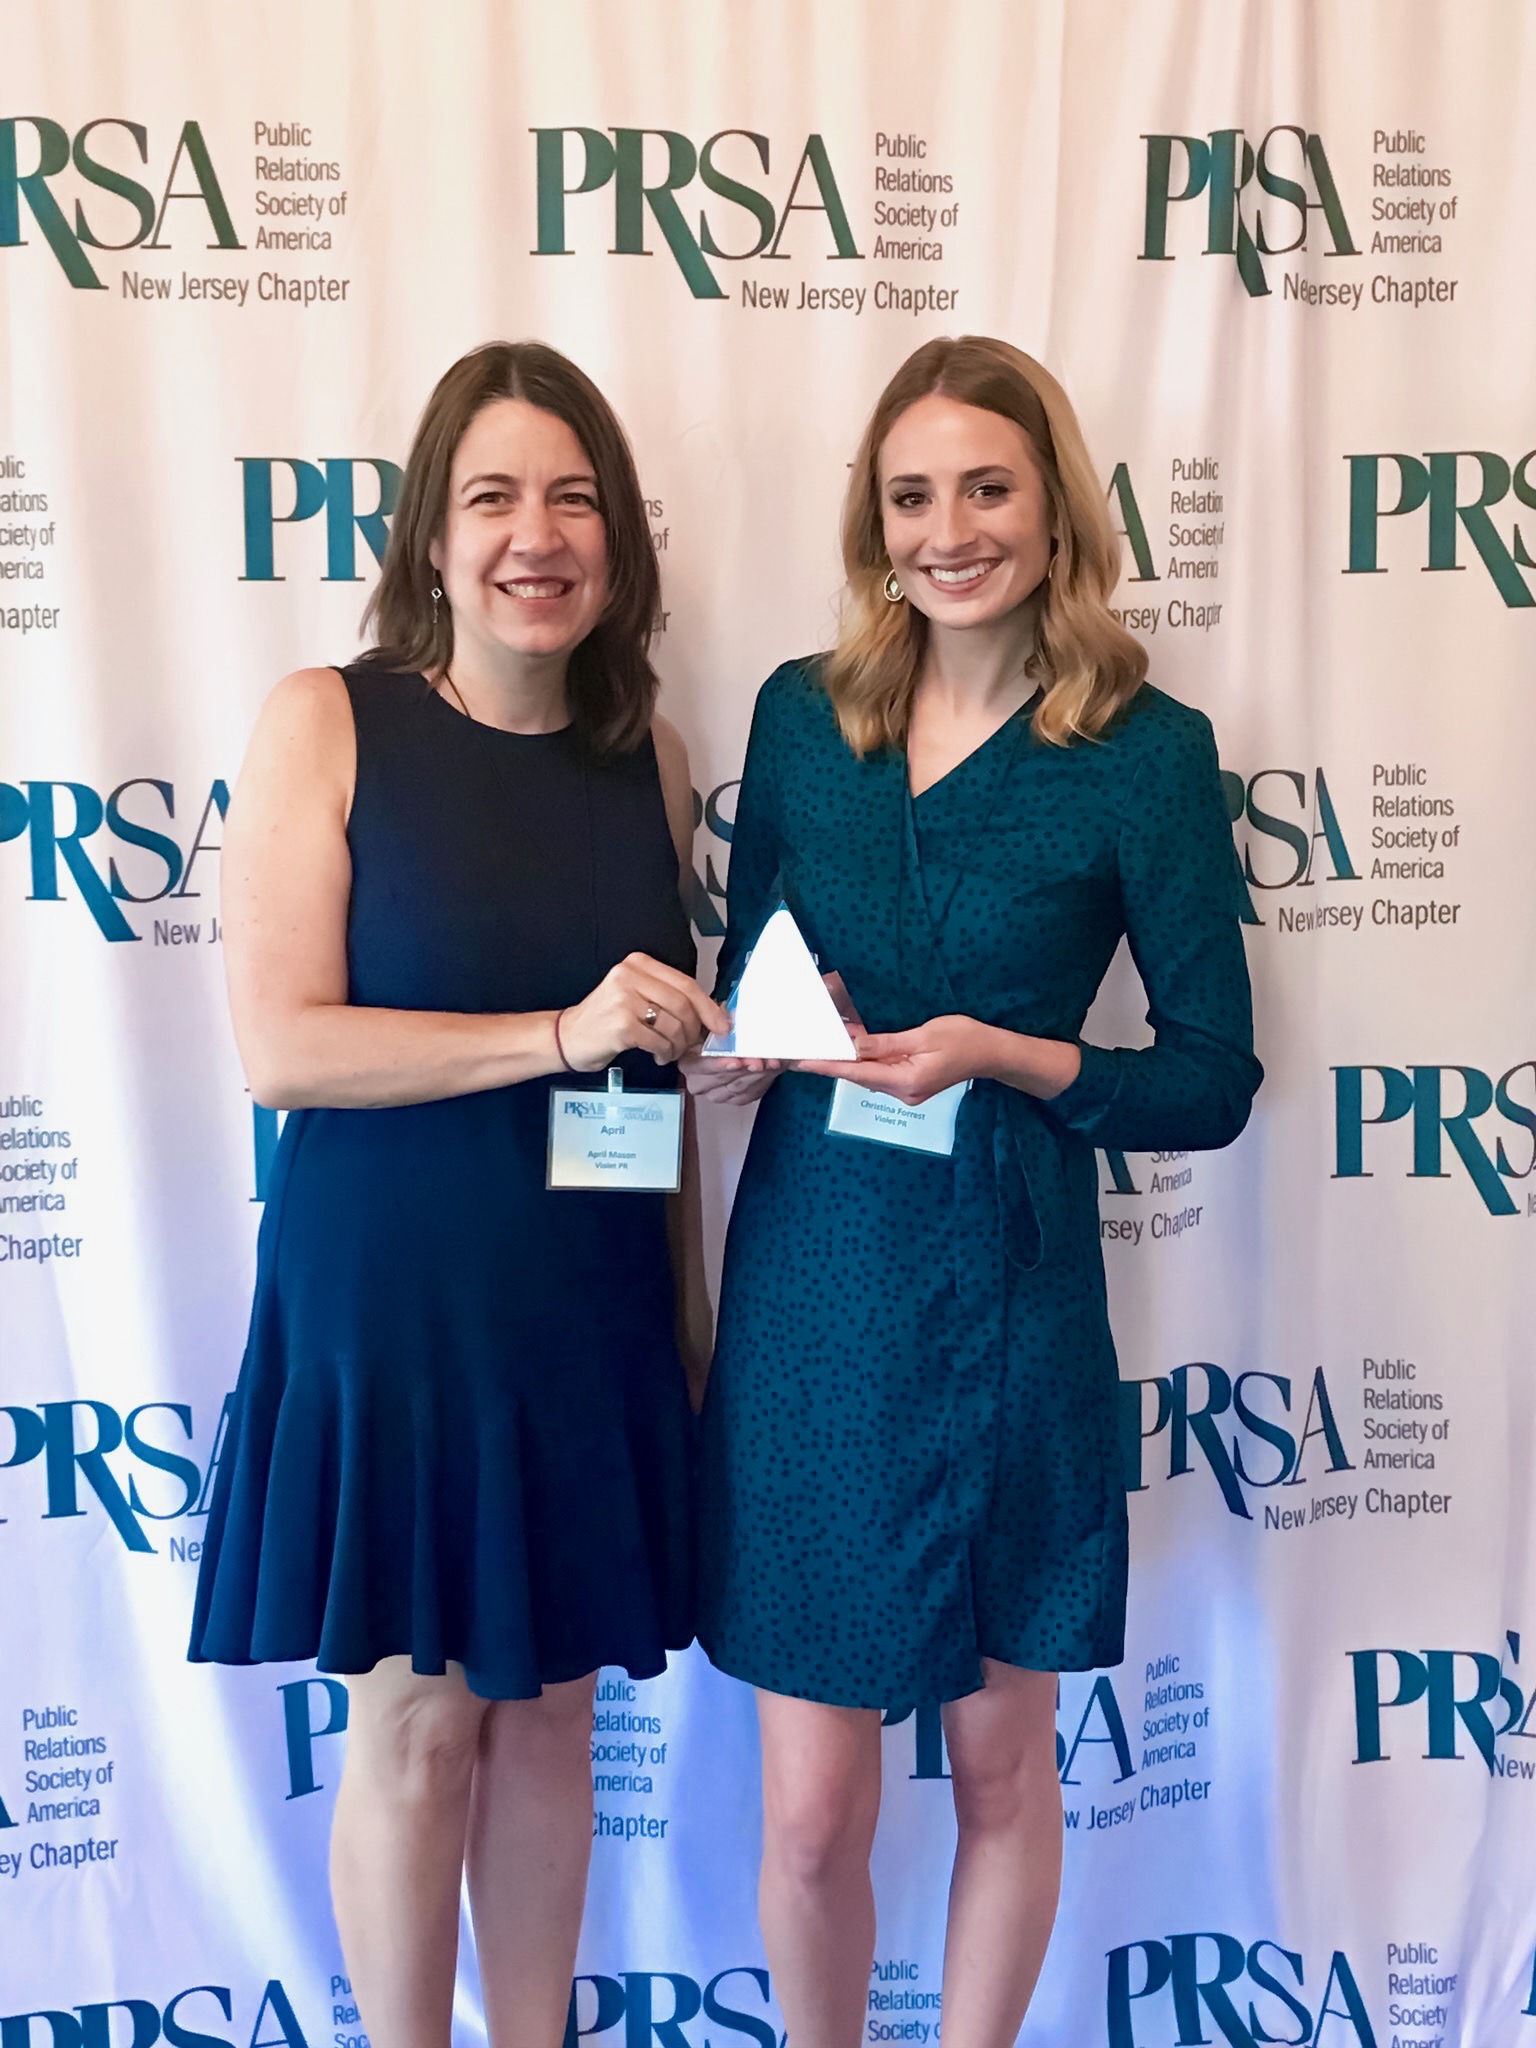 L-R: April Mason and Christina Forrest of Violet PR are shown after winning a PRSA NJ Pyramid award on June 12, 2019.